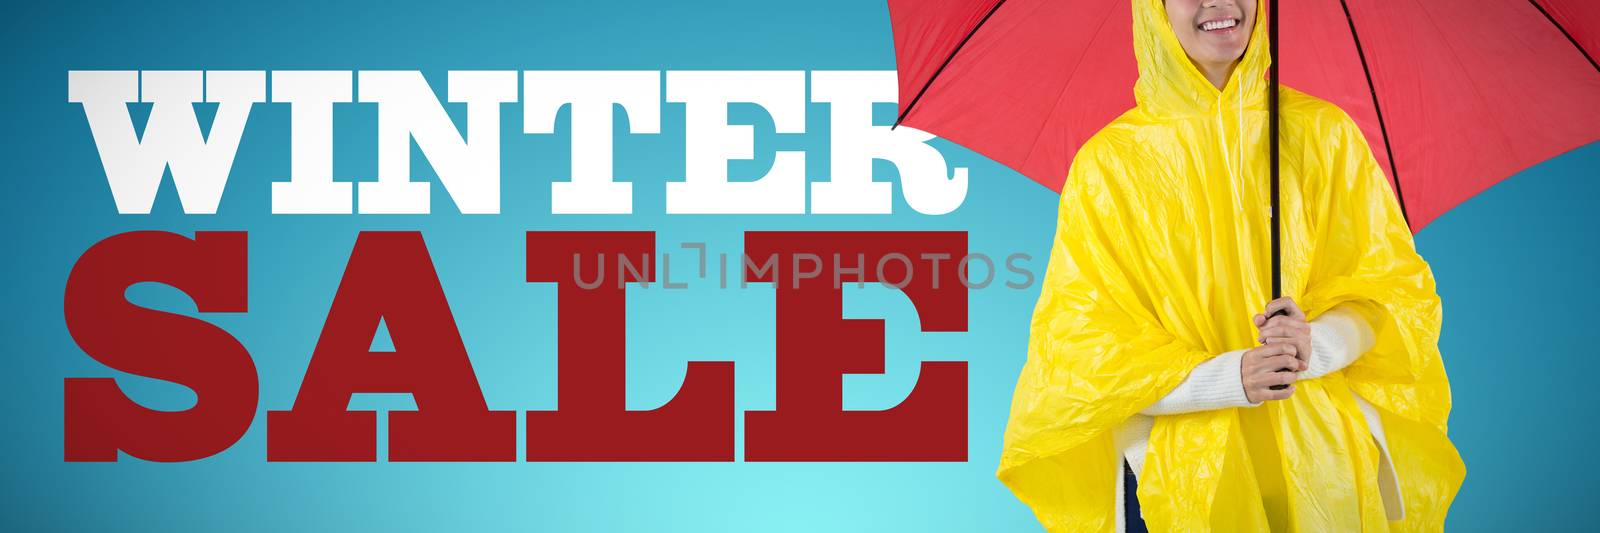 Composite image of woman in yellow raincoat holding an umbrella by Wavebreakmedia